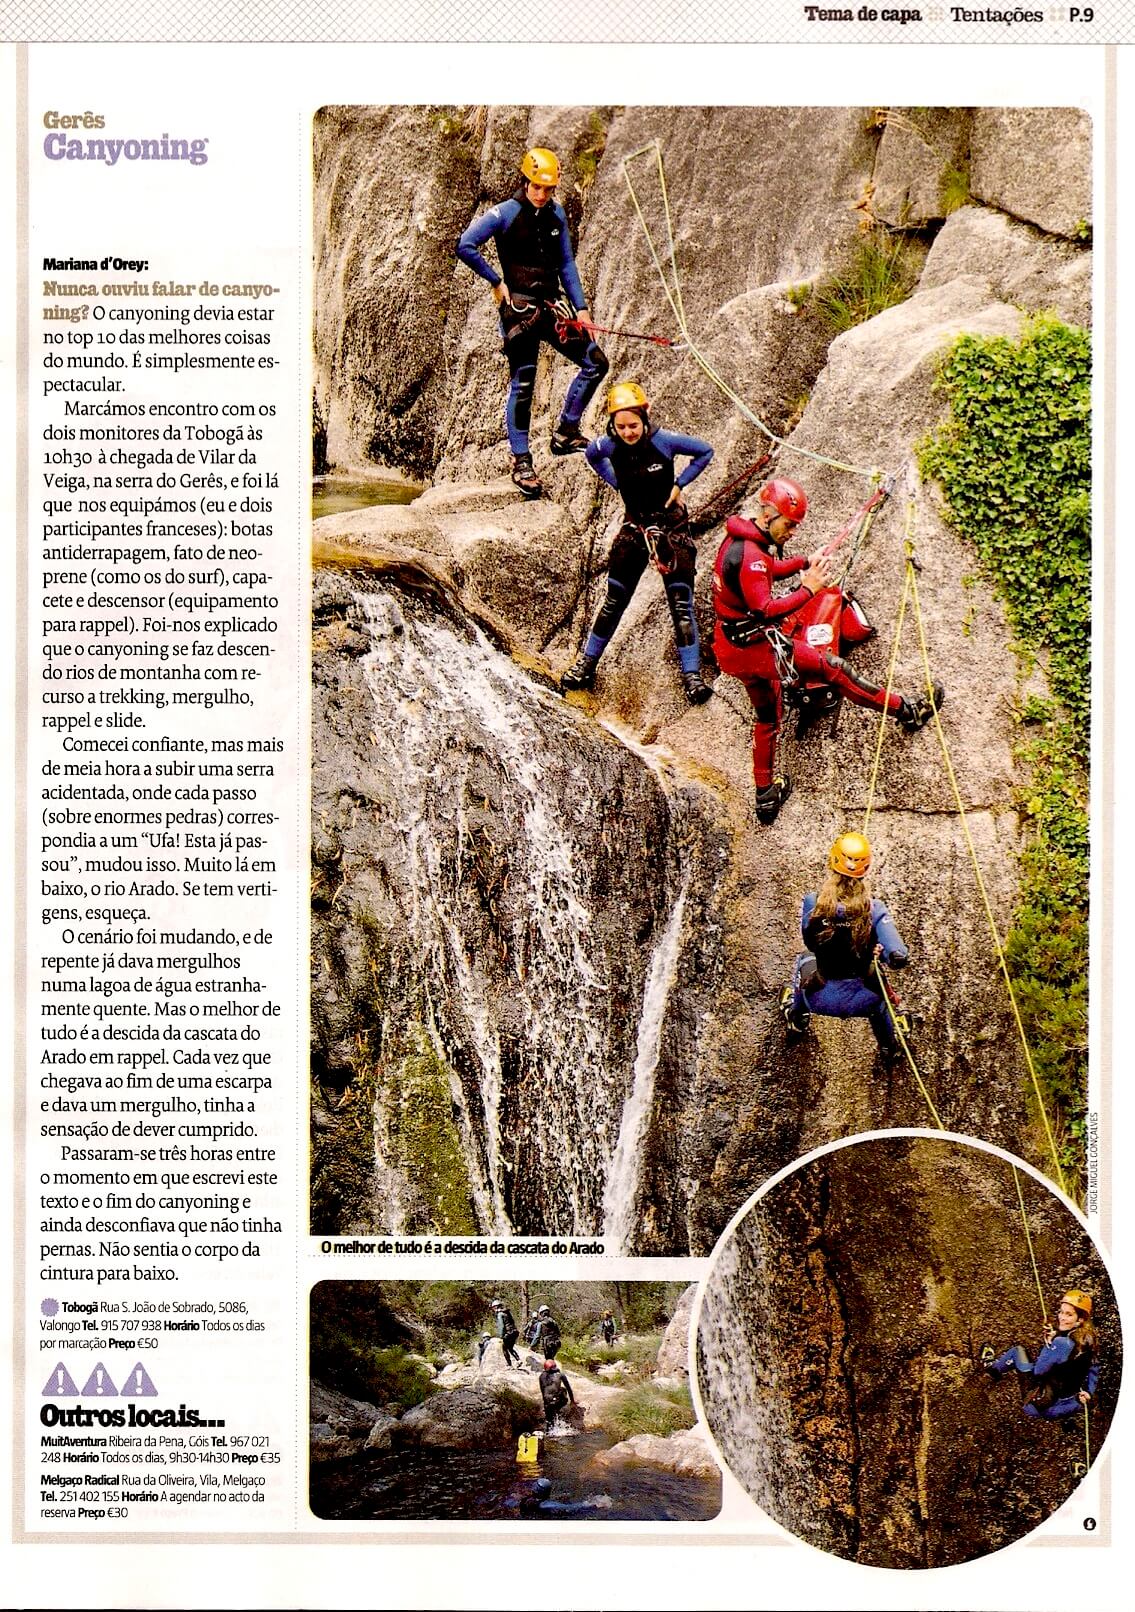 Adventure Tours Canyoning